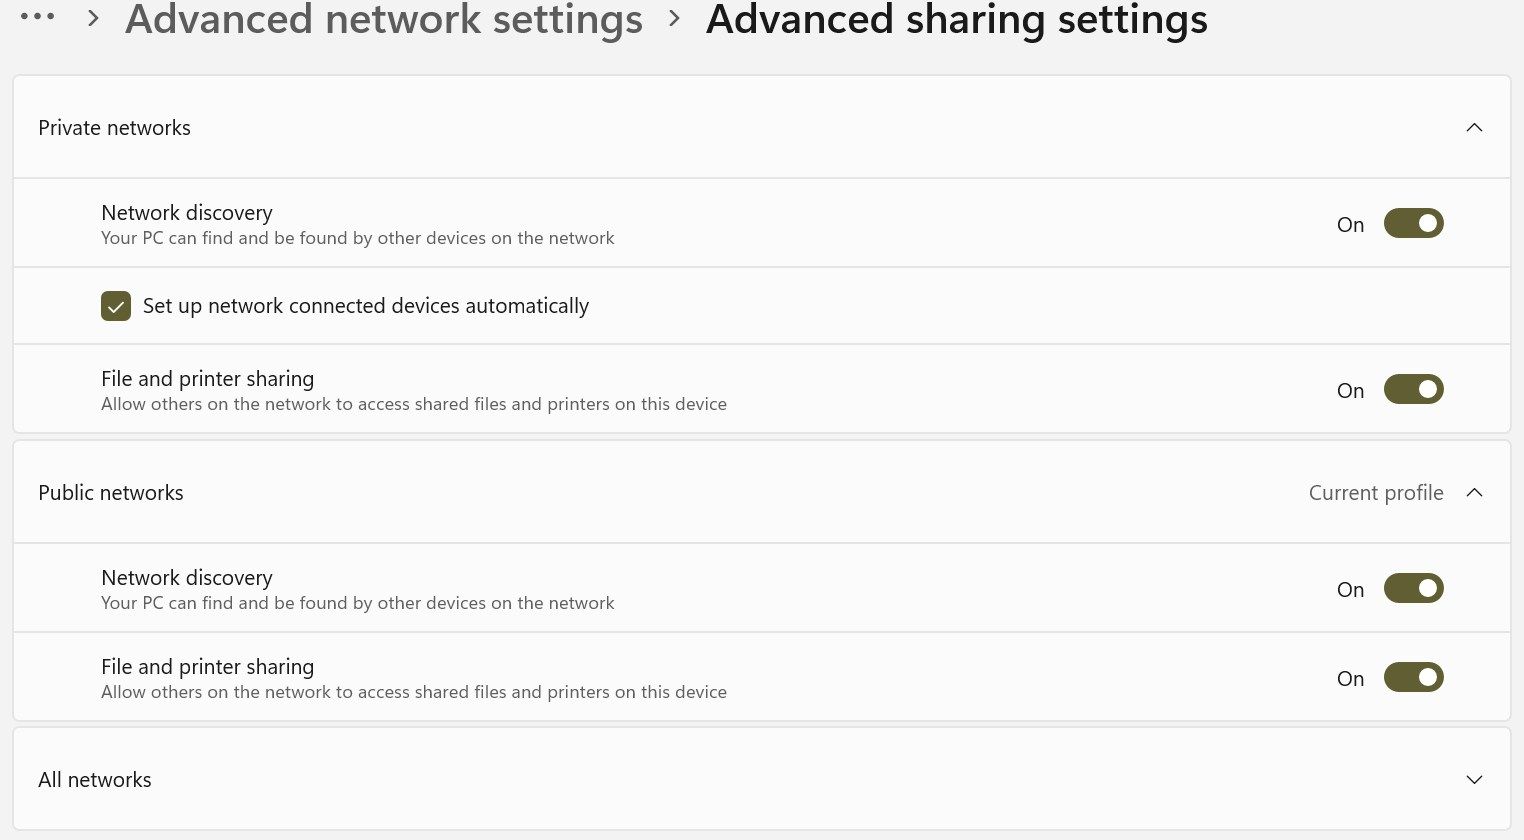 Enabling the network discovery and file and printer sharing in the Windows Settings app.